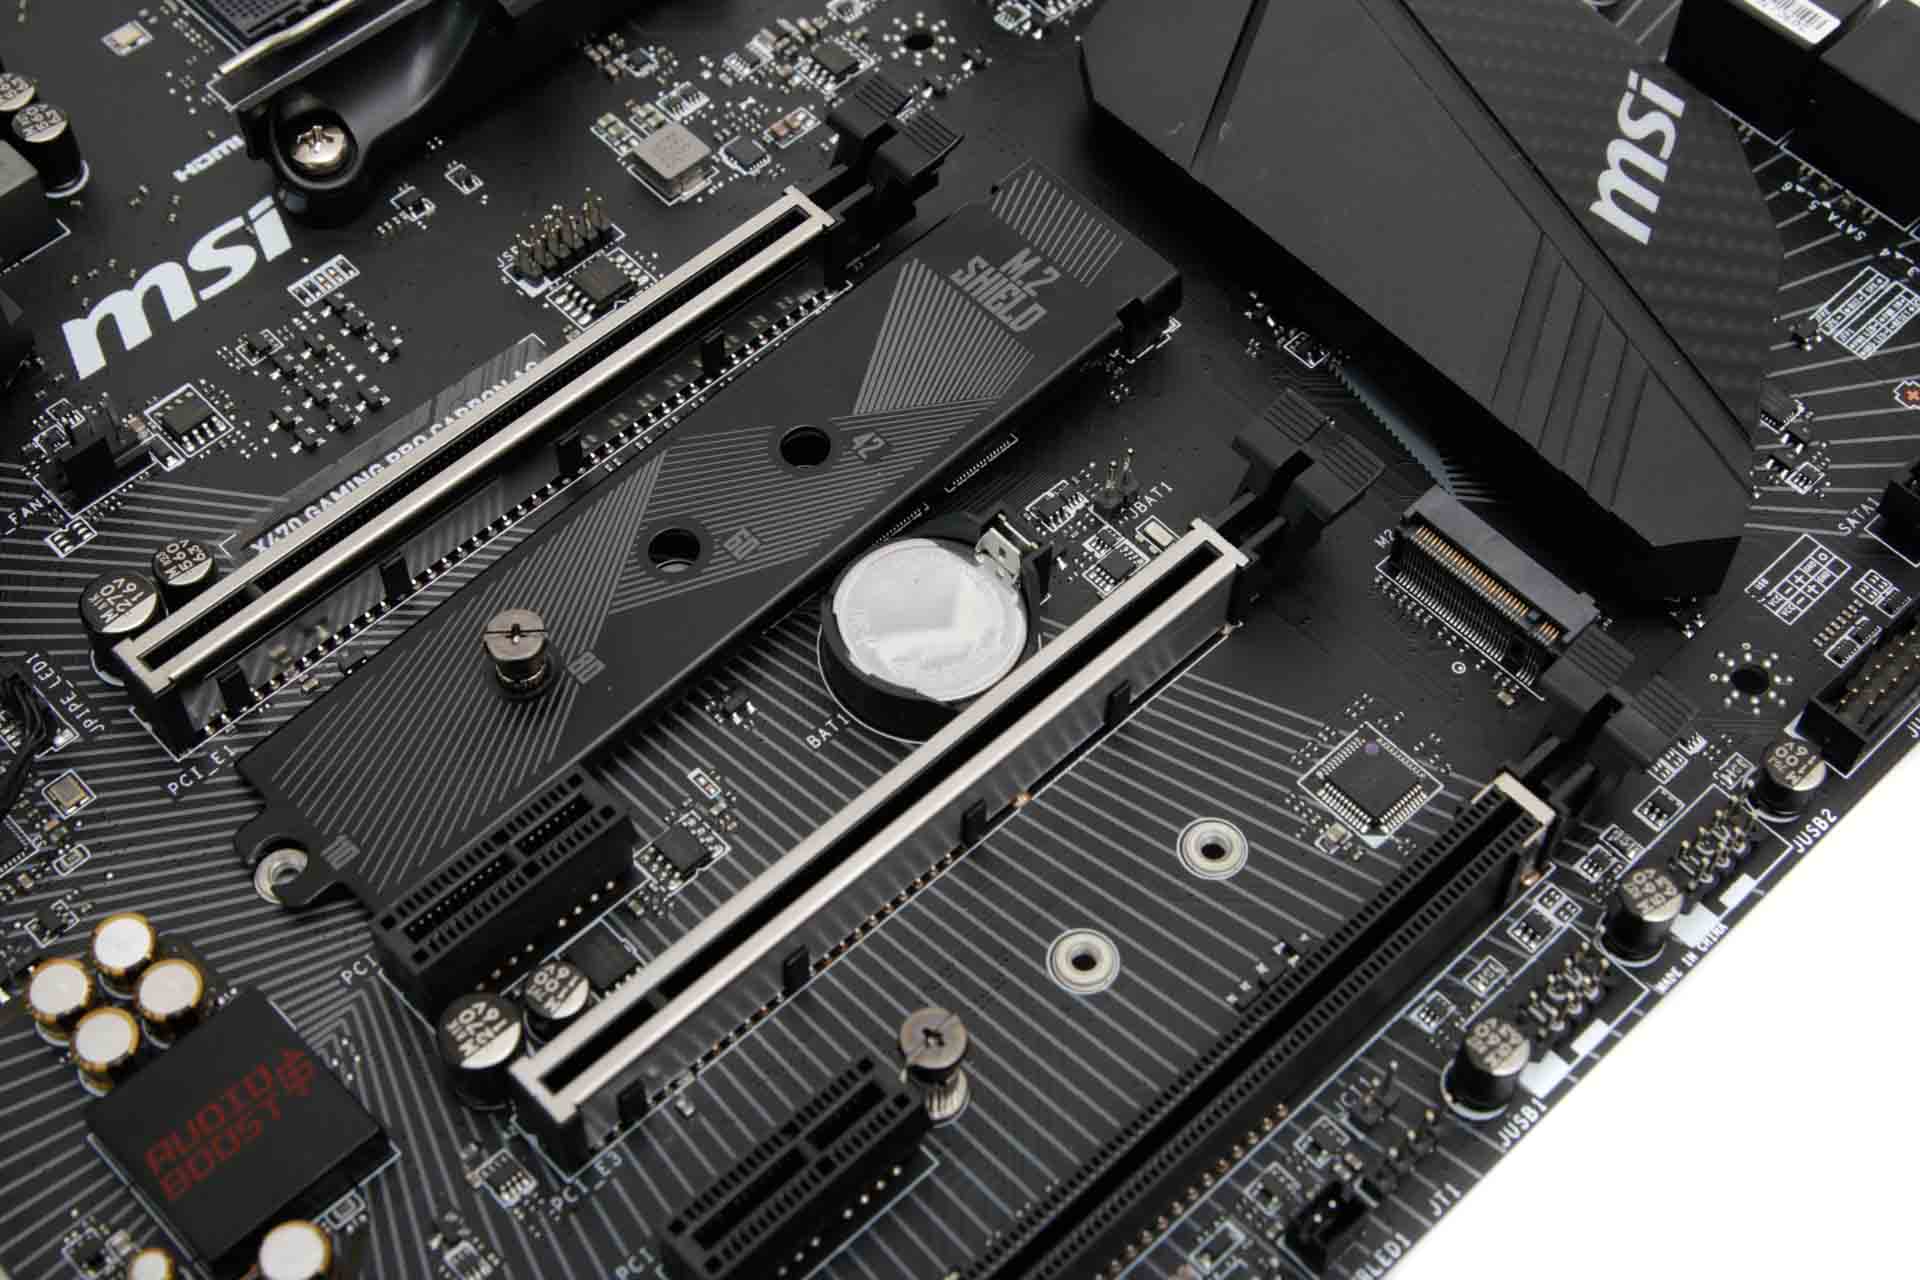 SSD slots are there on a motherboard